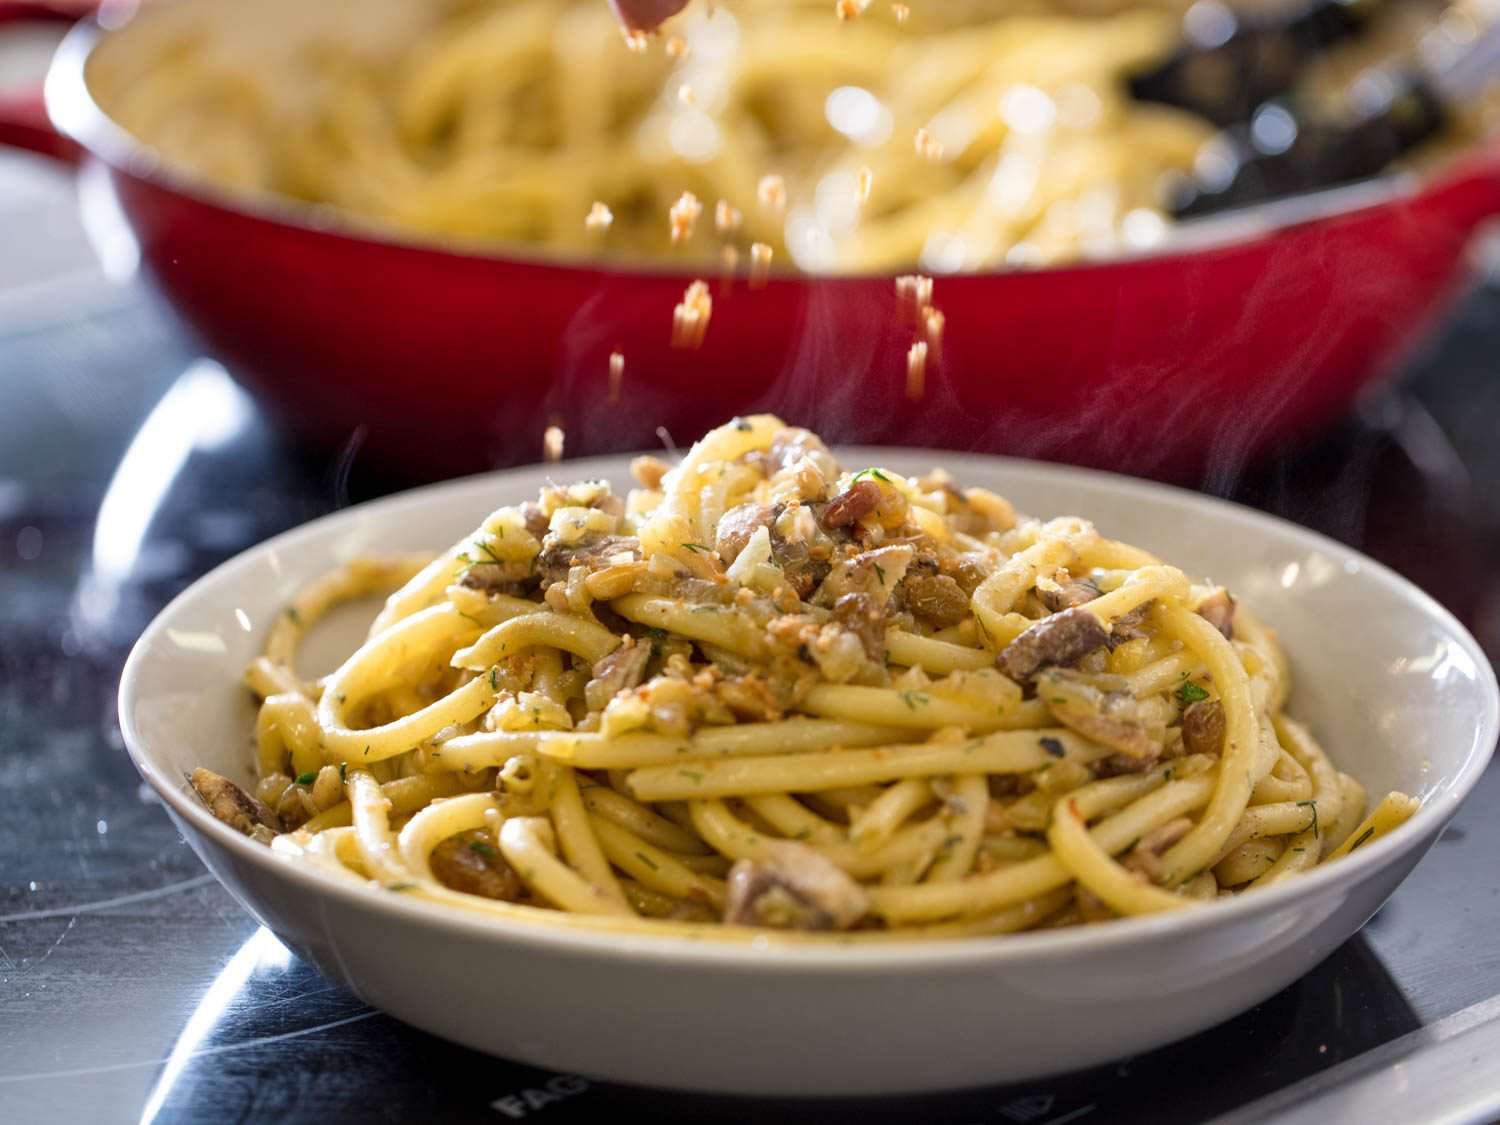 Sprinkling additional breadcrumbs over a finished dish of Sicilian pasta with sardines.